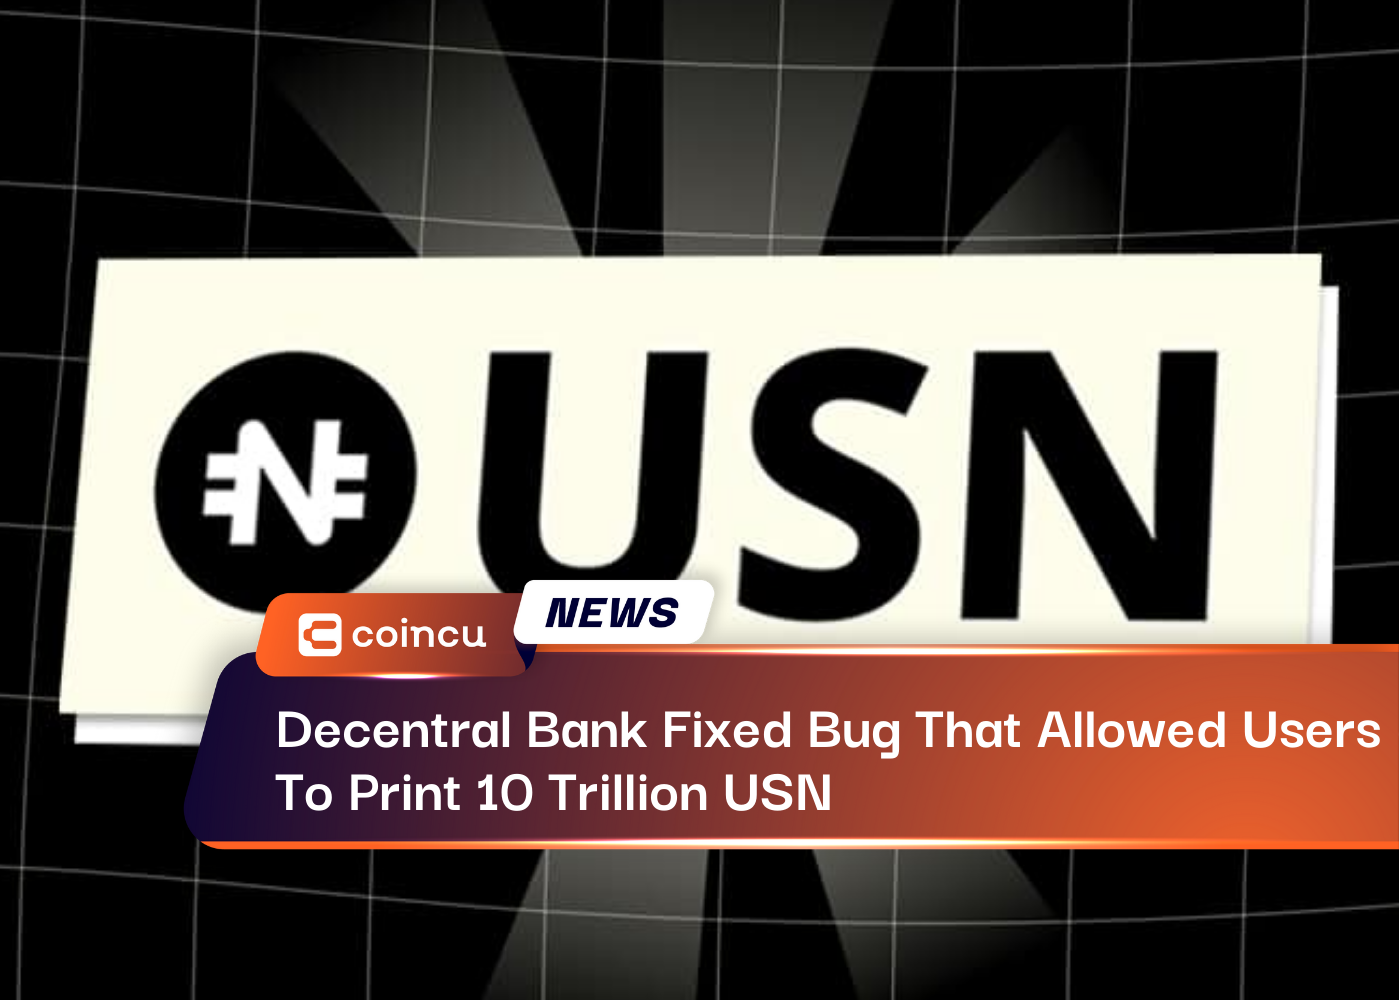 Decentral Bank Fixed Bug That Allowed Users To Print 10 Trillion USN